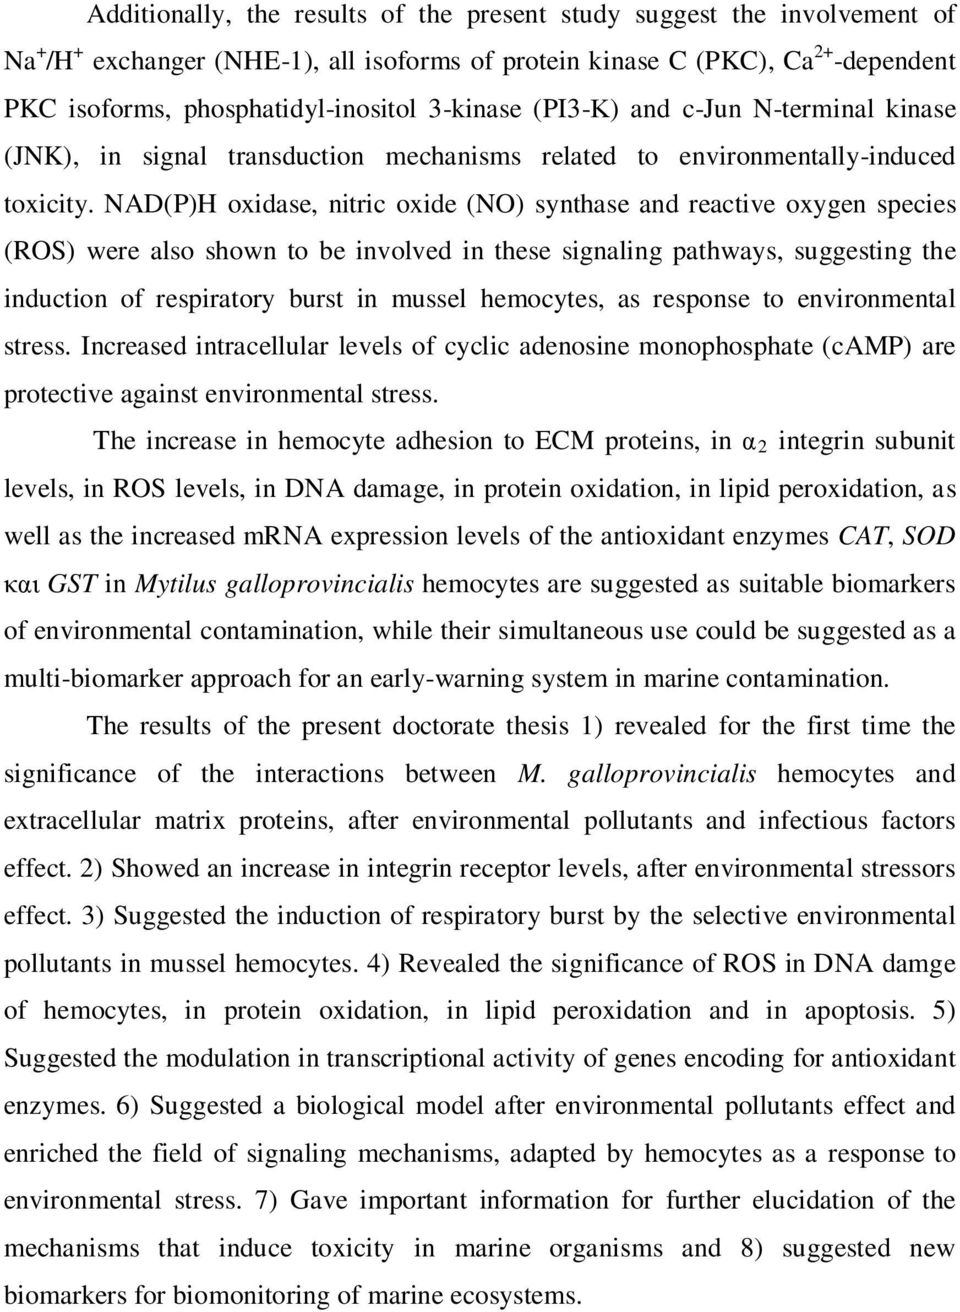 NAD(P)H oxidase, nitric oxide (NO) synthase and reactive oxygen species (ROS) were also shown to be involved in these signaling pathways, suggesting the induction of respiratory burst in mussel